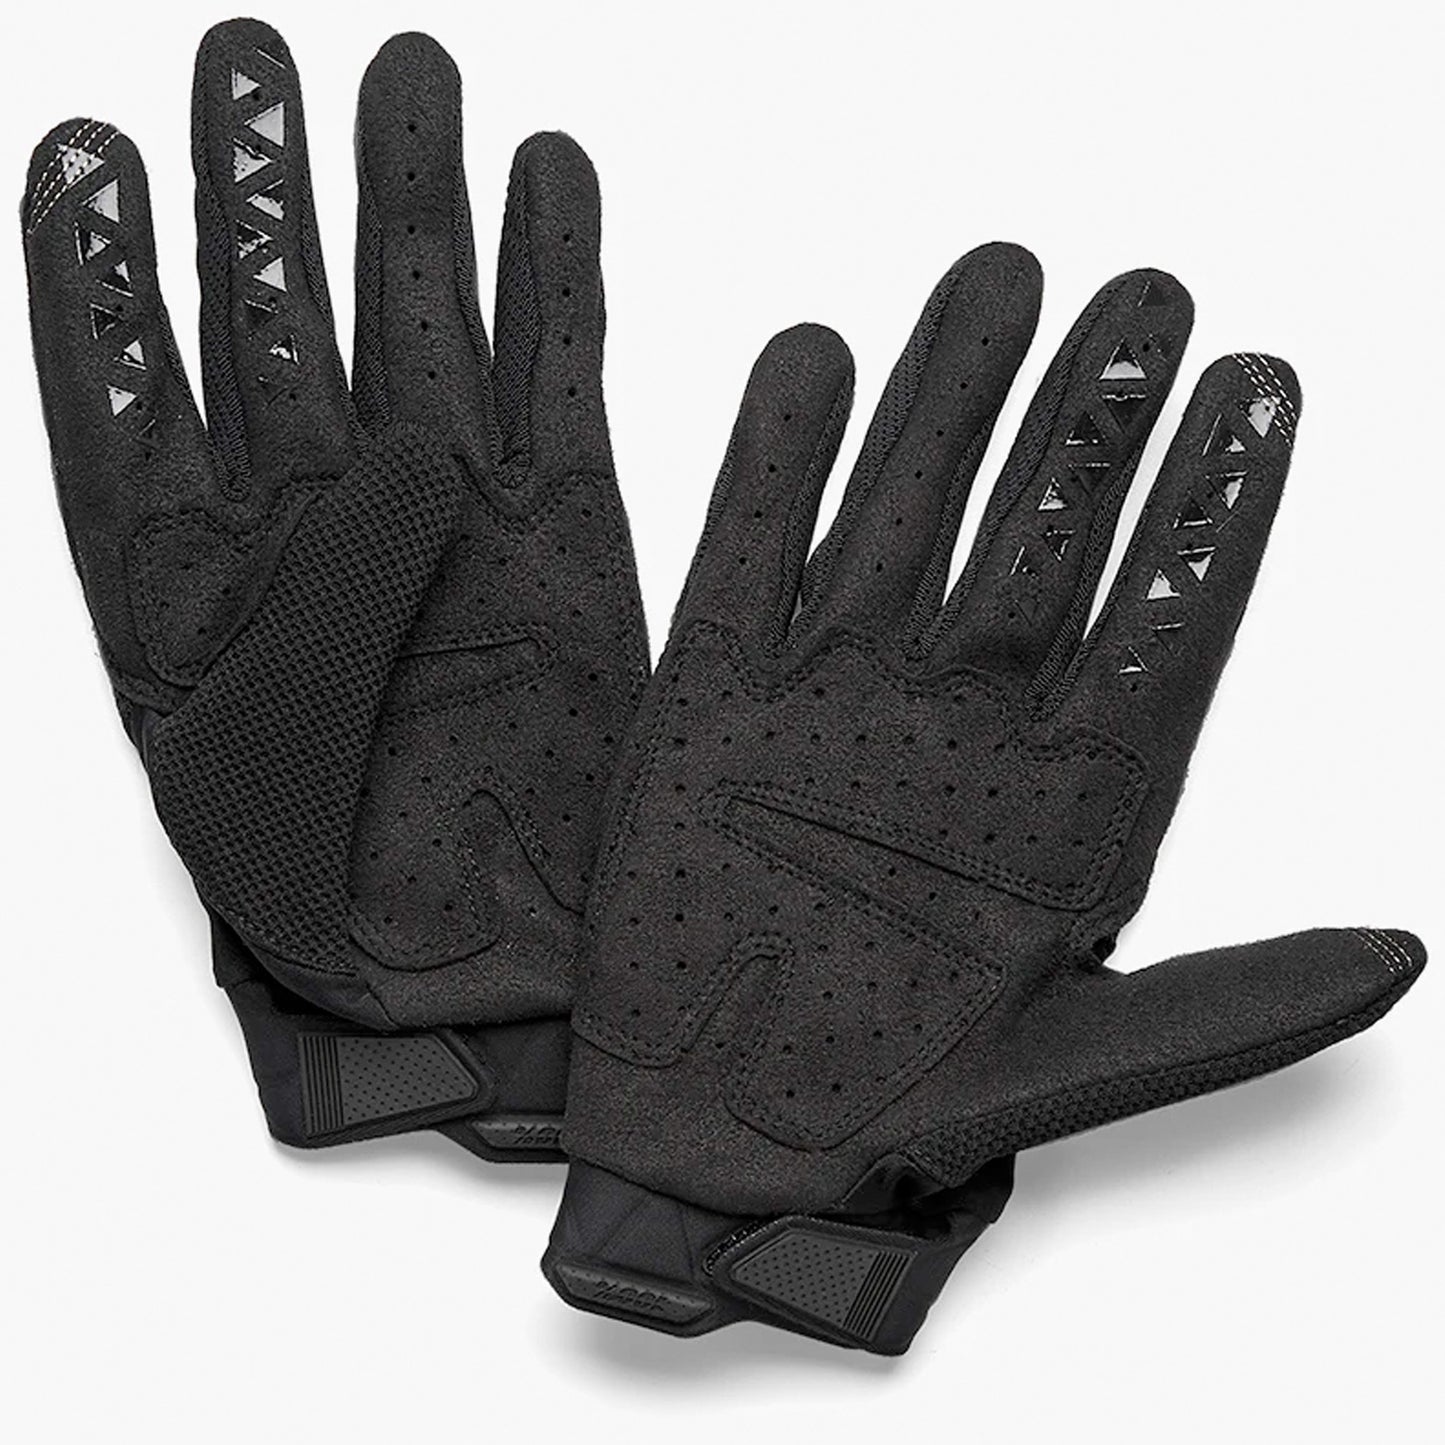 100% Airmatic Youth Gloves, Black/Charcoal